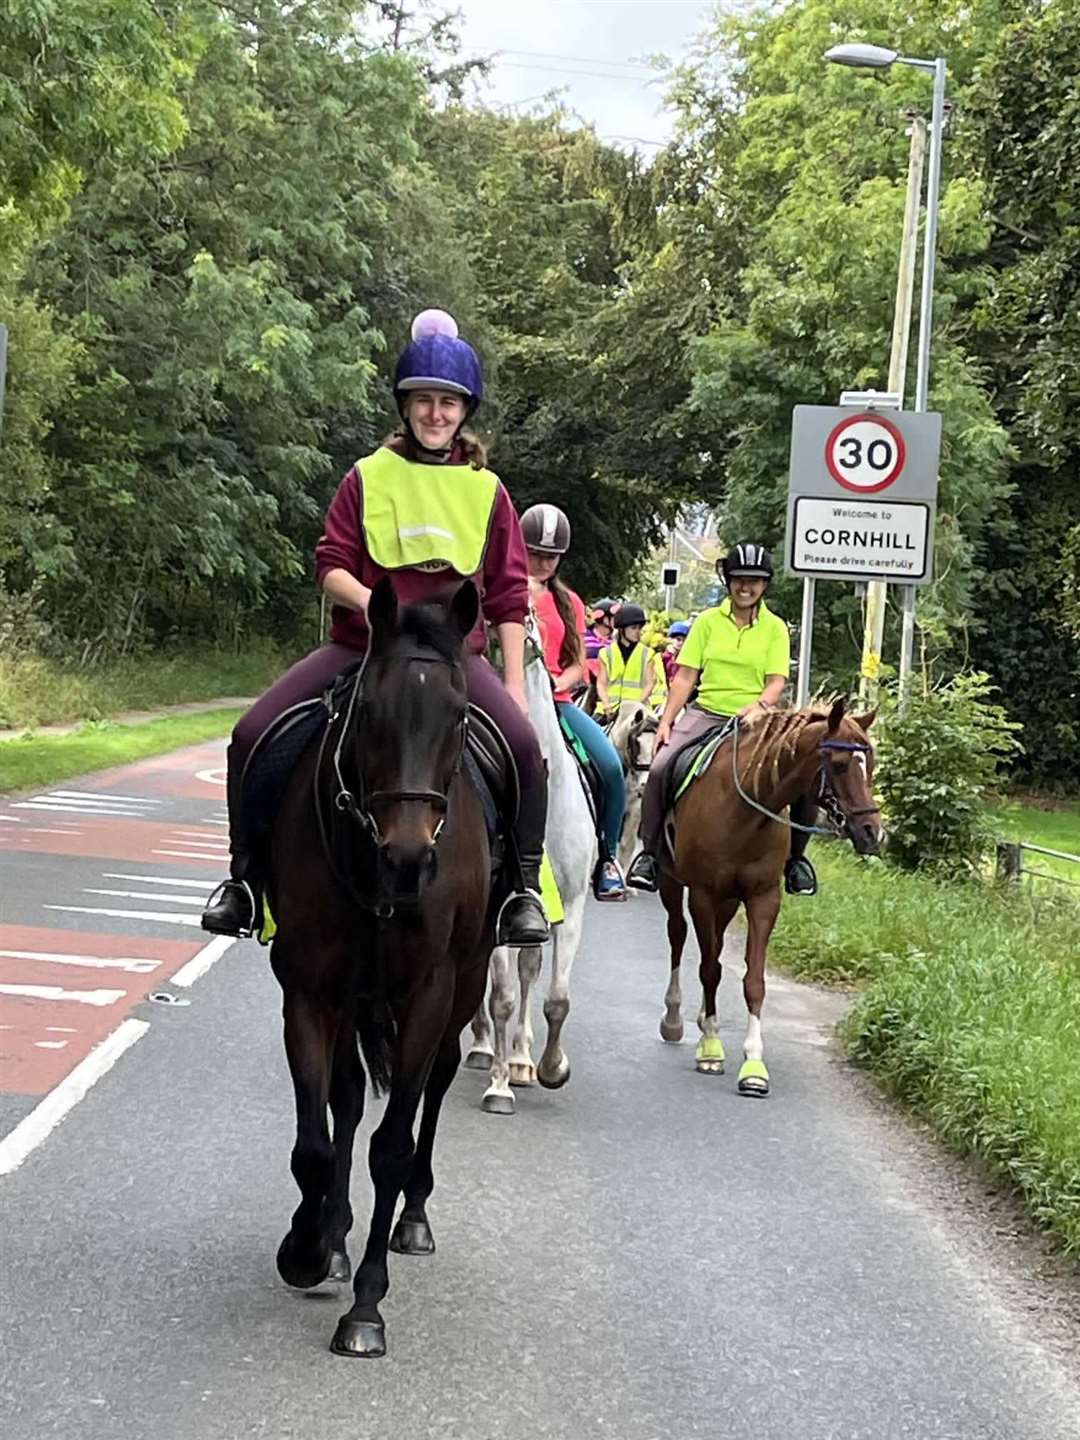 Cornhill horse riders took to the roads to raise awareness about safety.